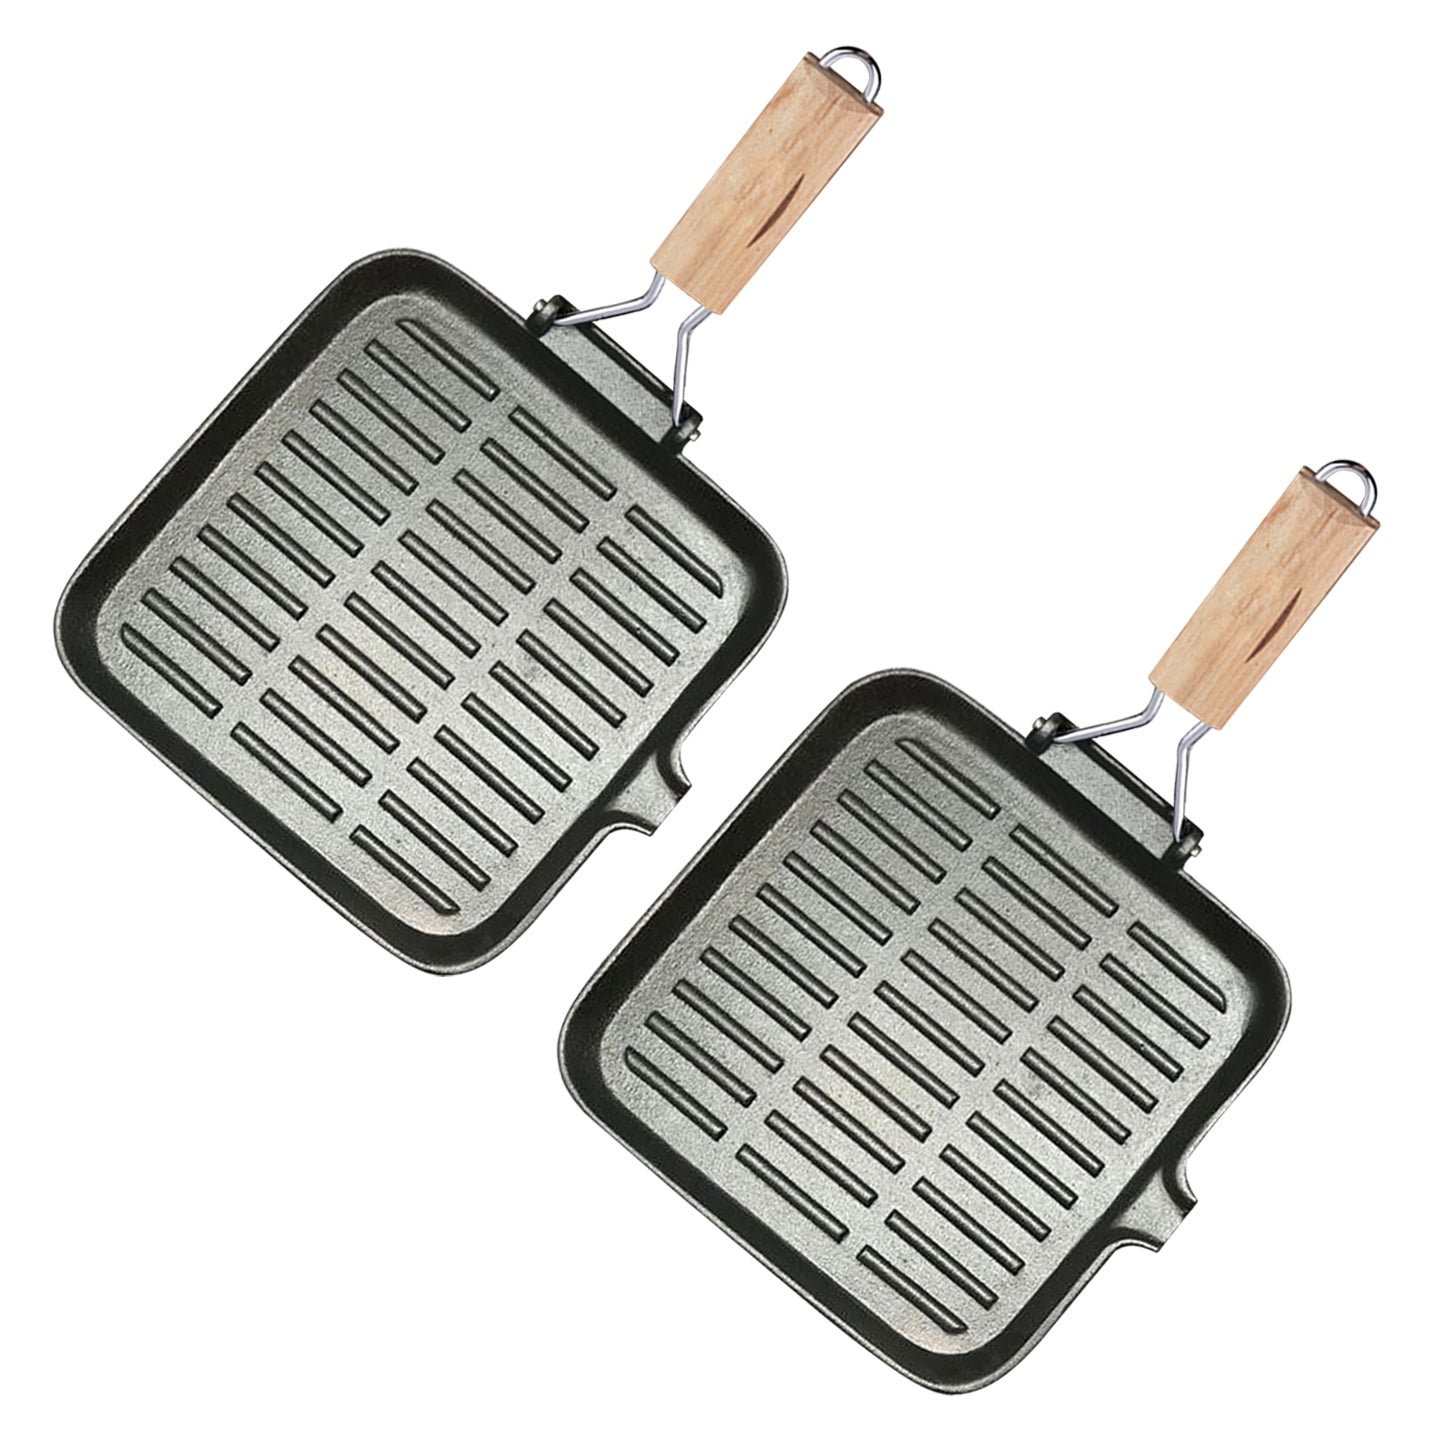 SOGA 2X 28cm Ribbed Cast Iron Square Steak Frying Grill Skillet Pan with Folding Wooden Handle Soga